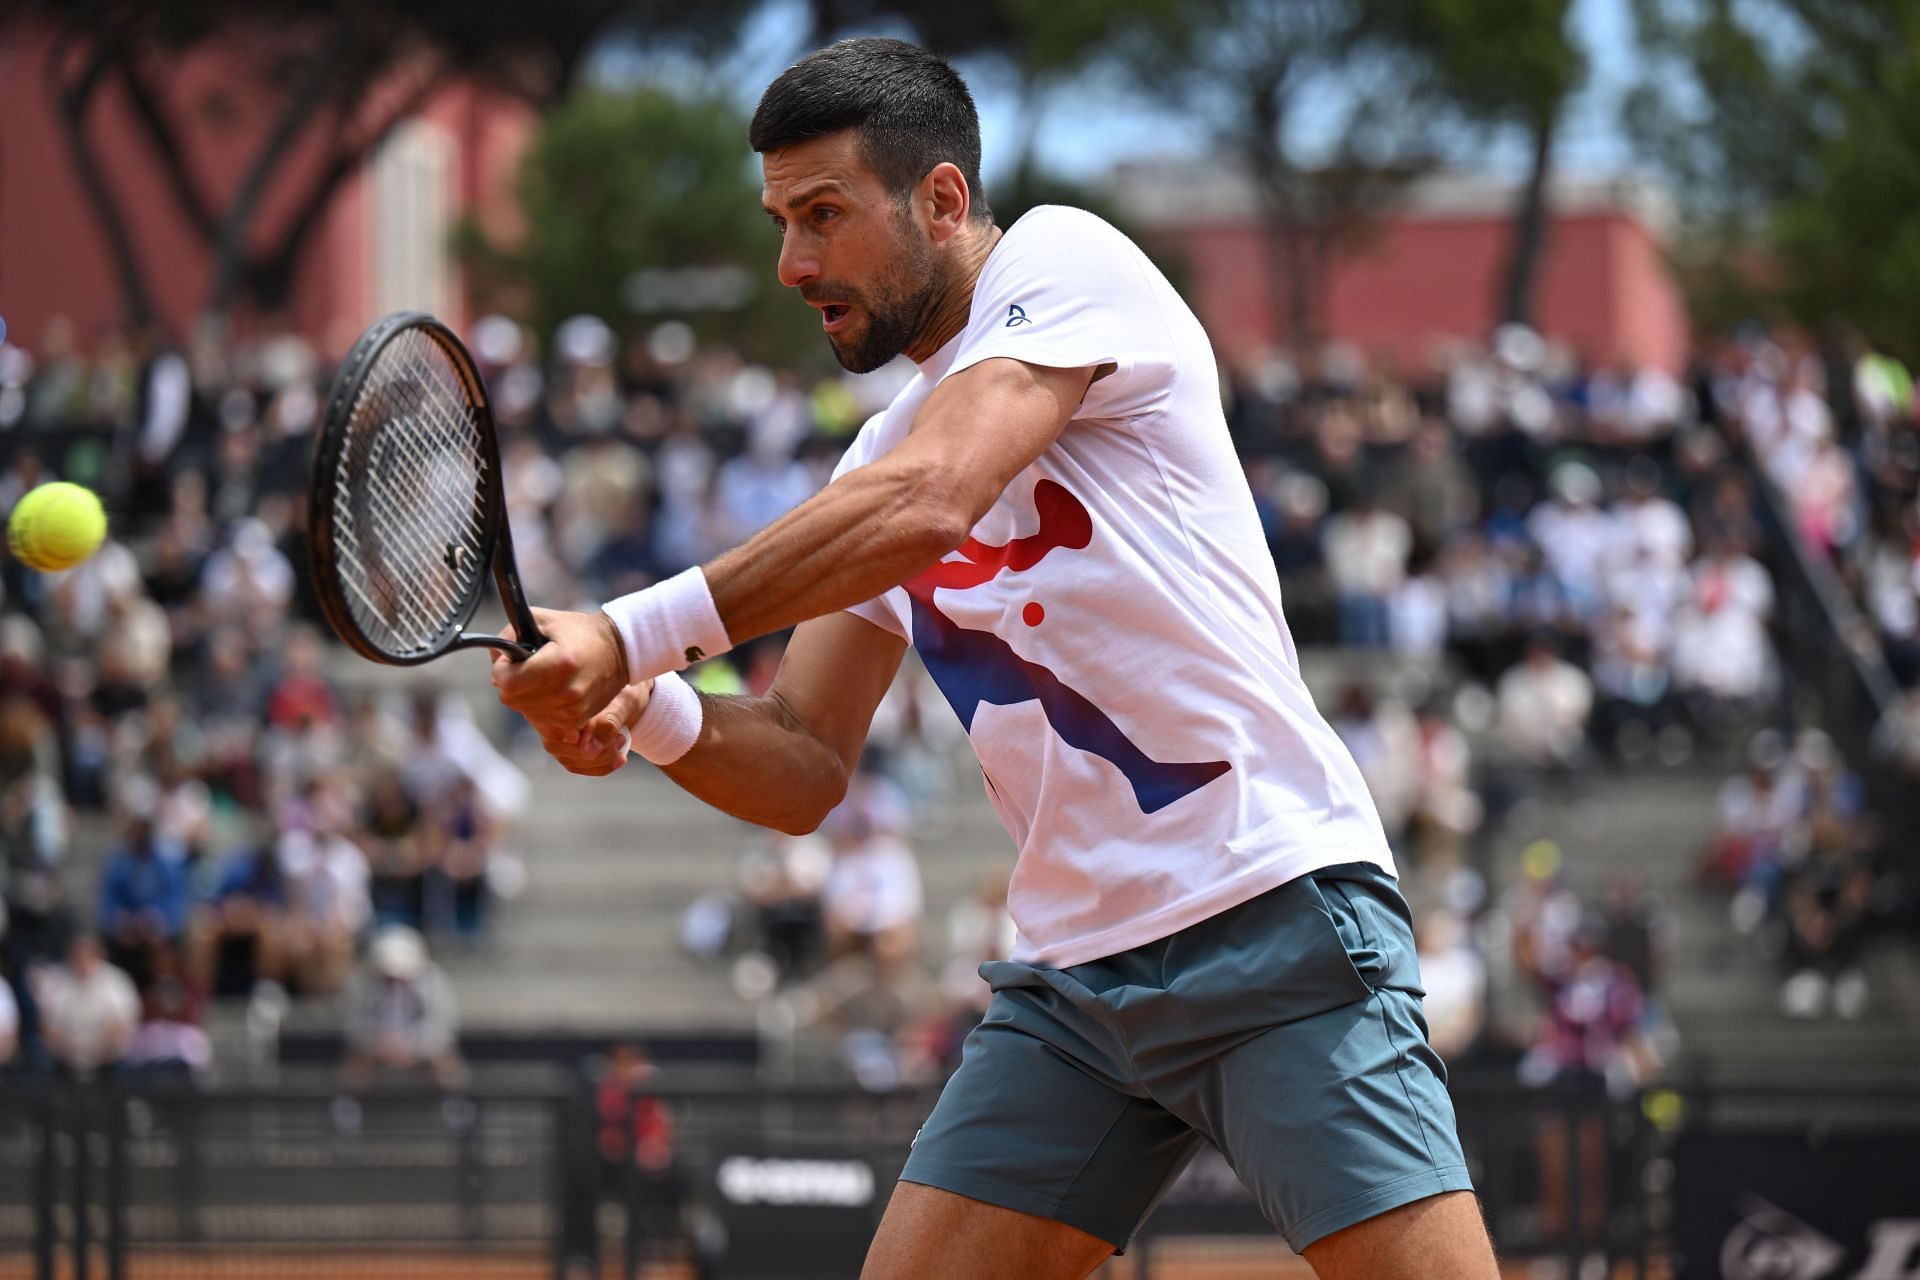 The Serb practising in Rome ahead of the Italian Open